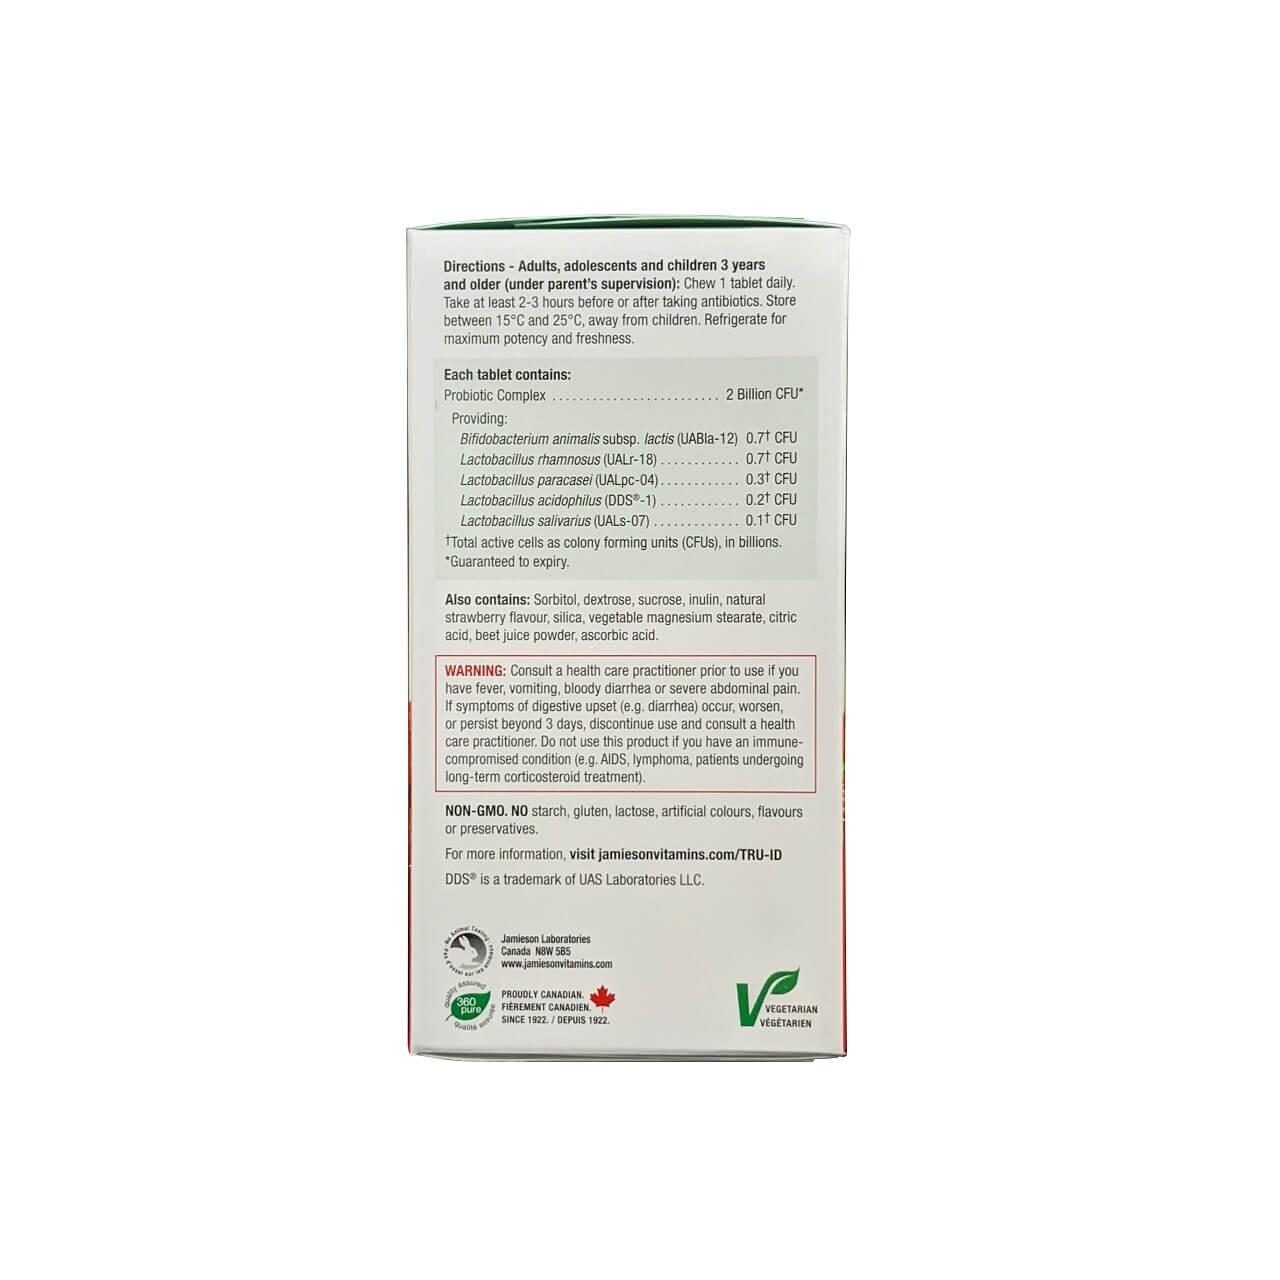 Directions, ingredients, and warnings for Jamieson Probiotic Chewables Natural Strawberry Flavour (60 chewable tablets) in English